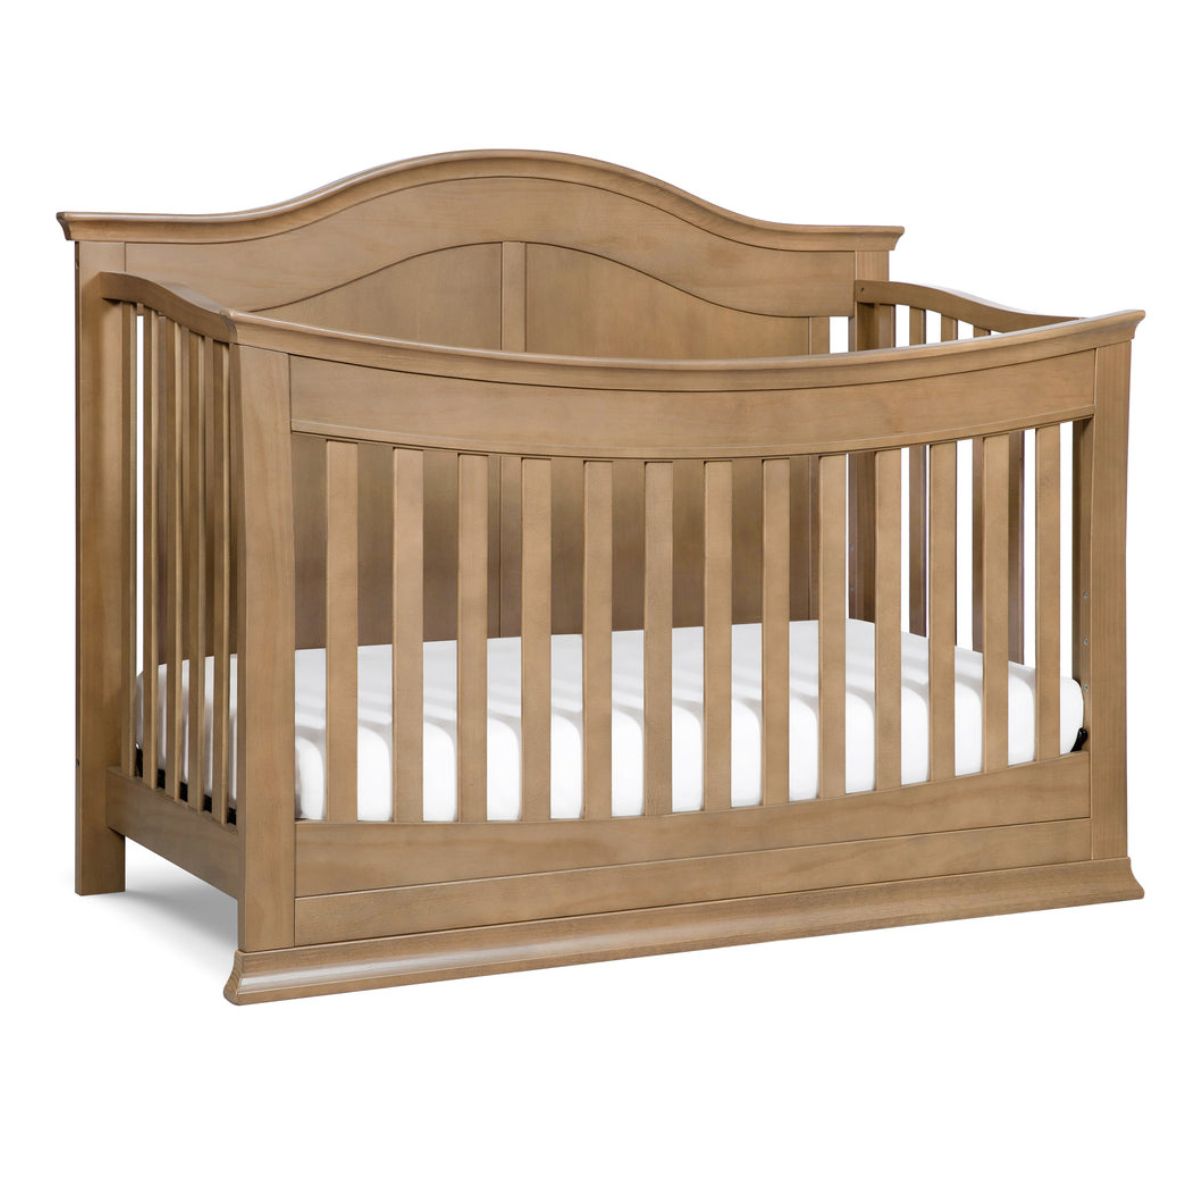 DaVinci Meadow 4-in-1 Convertible Crib | The Baby Cubby